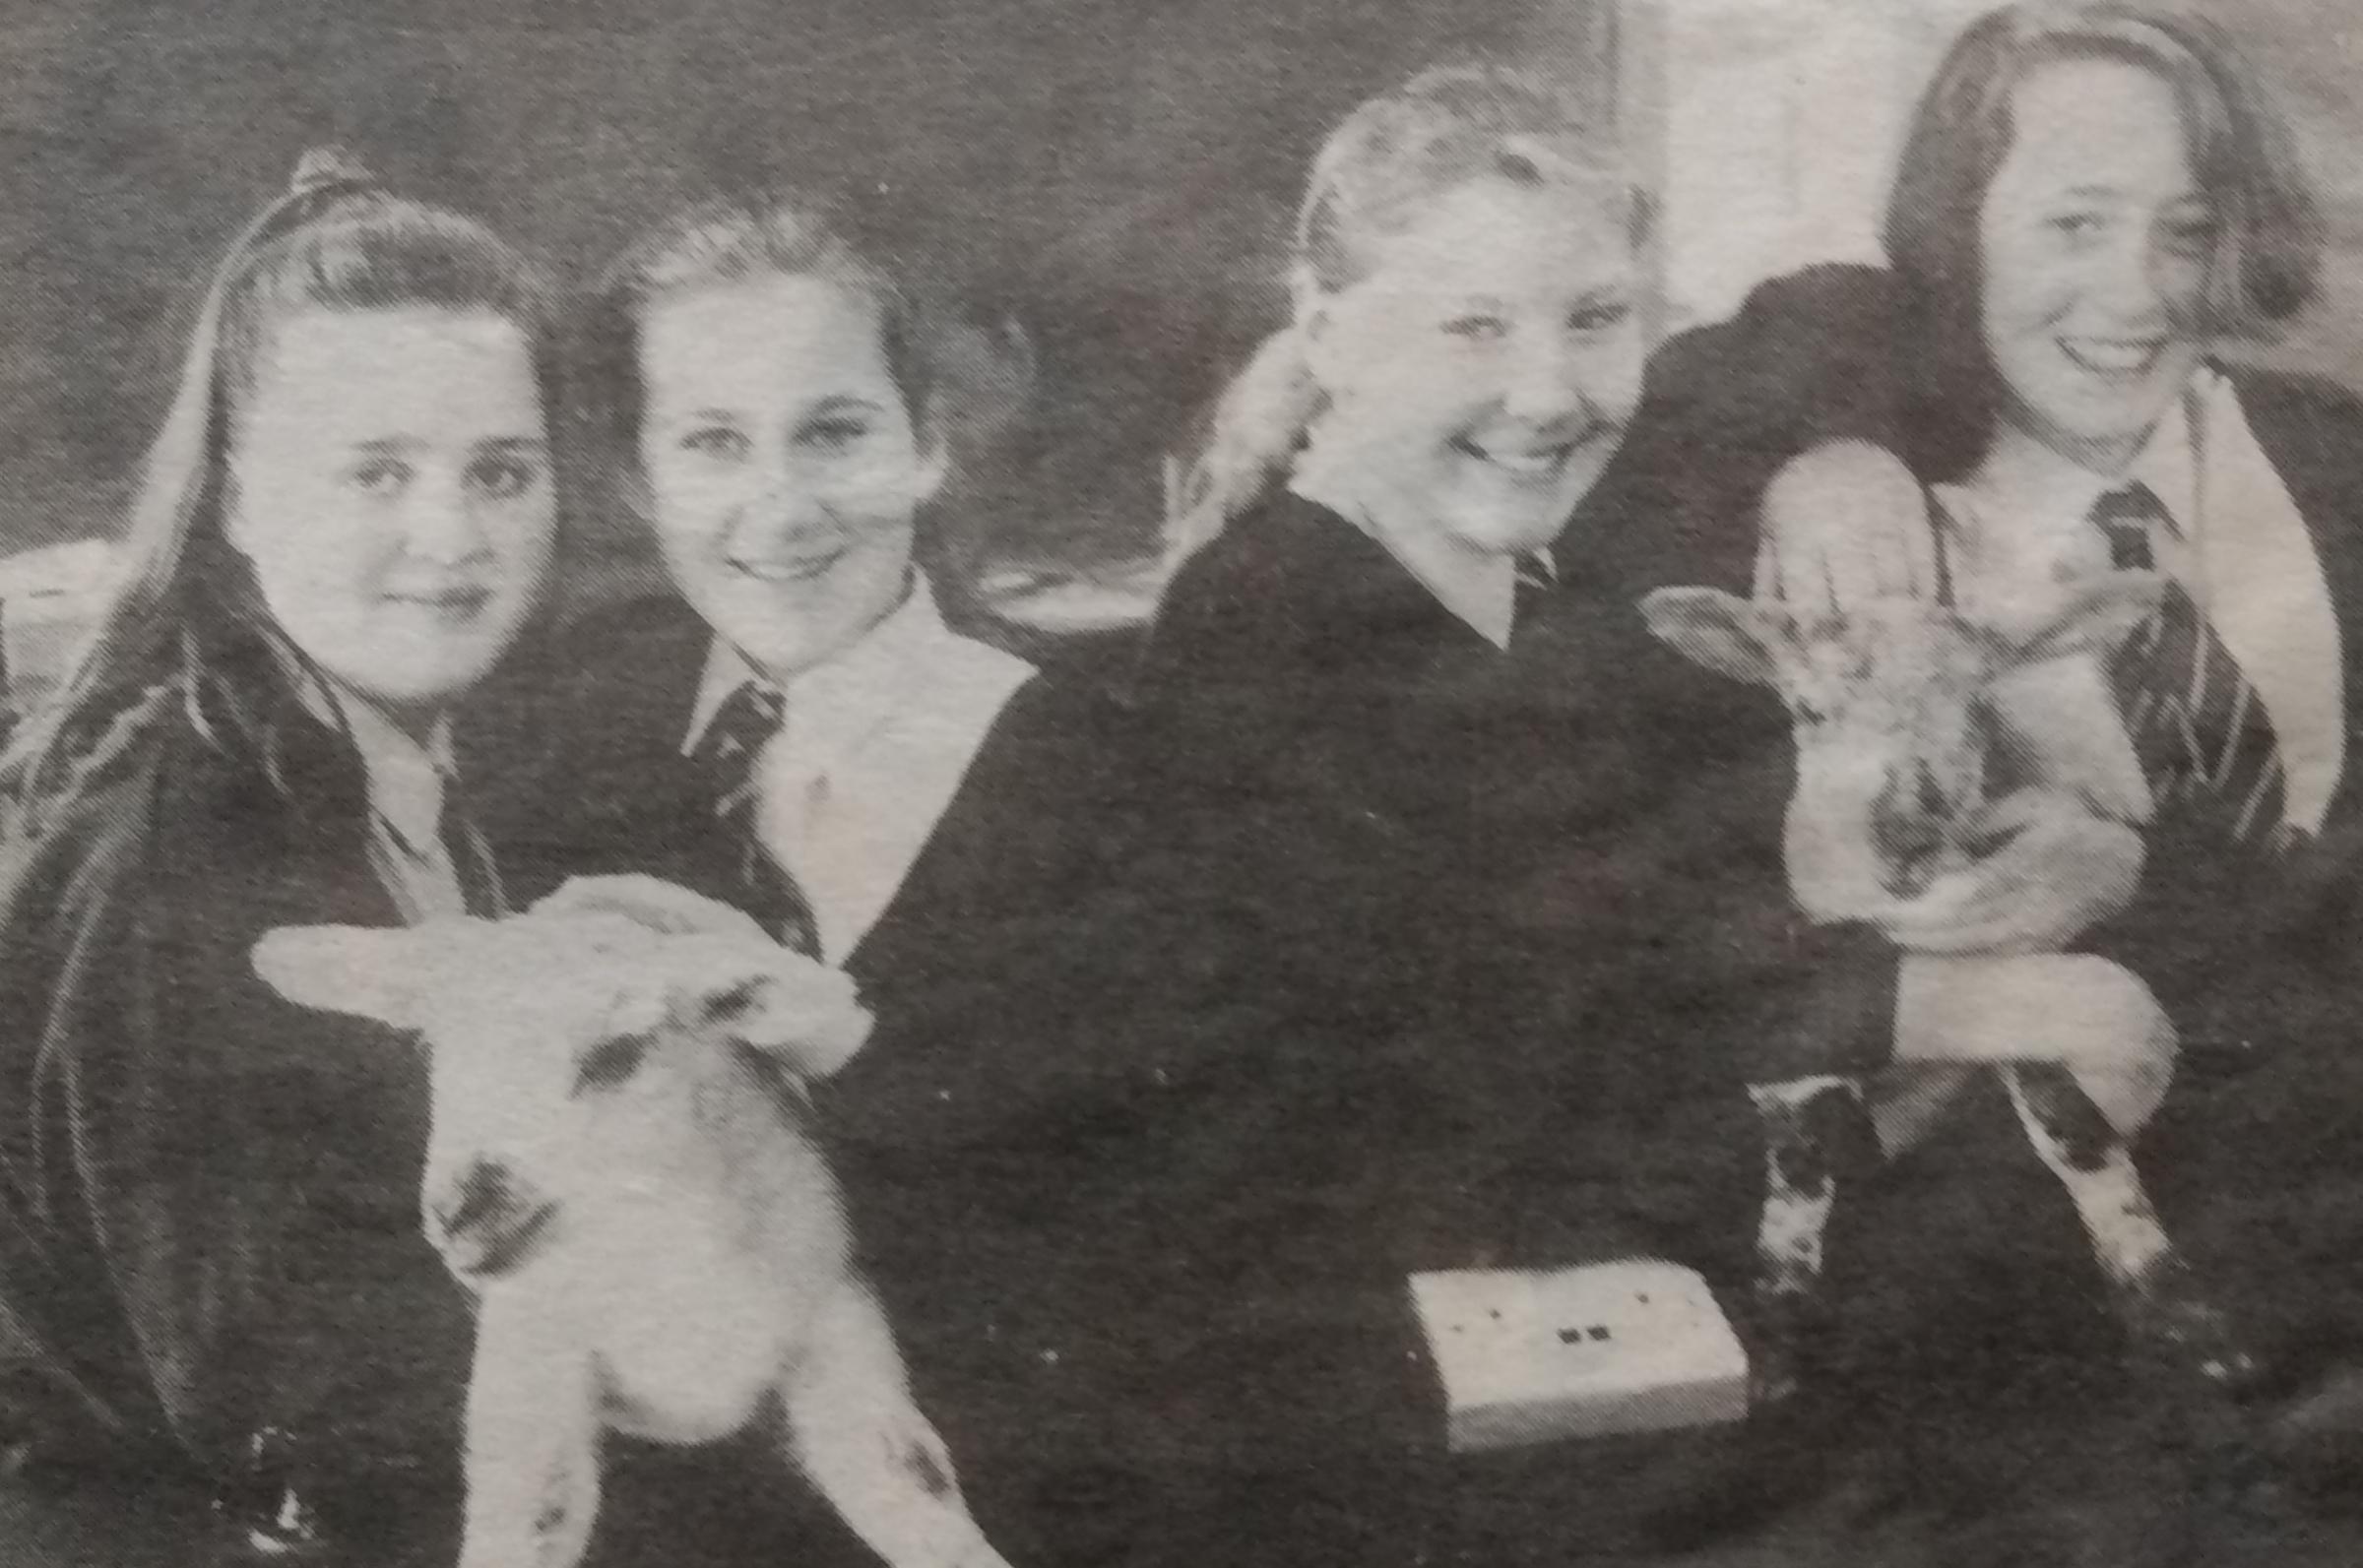 April 1993 and Sprogitt and Sylvester, lambs born to one of the two sheep owned by the school, say hello to Caron Cox, Nicola Jones, Natalie Smith and Suzanne Harper